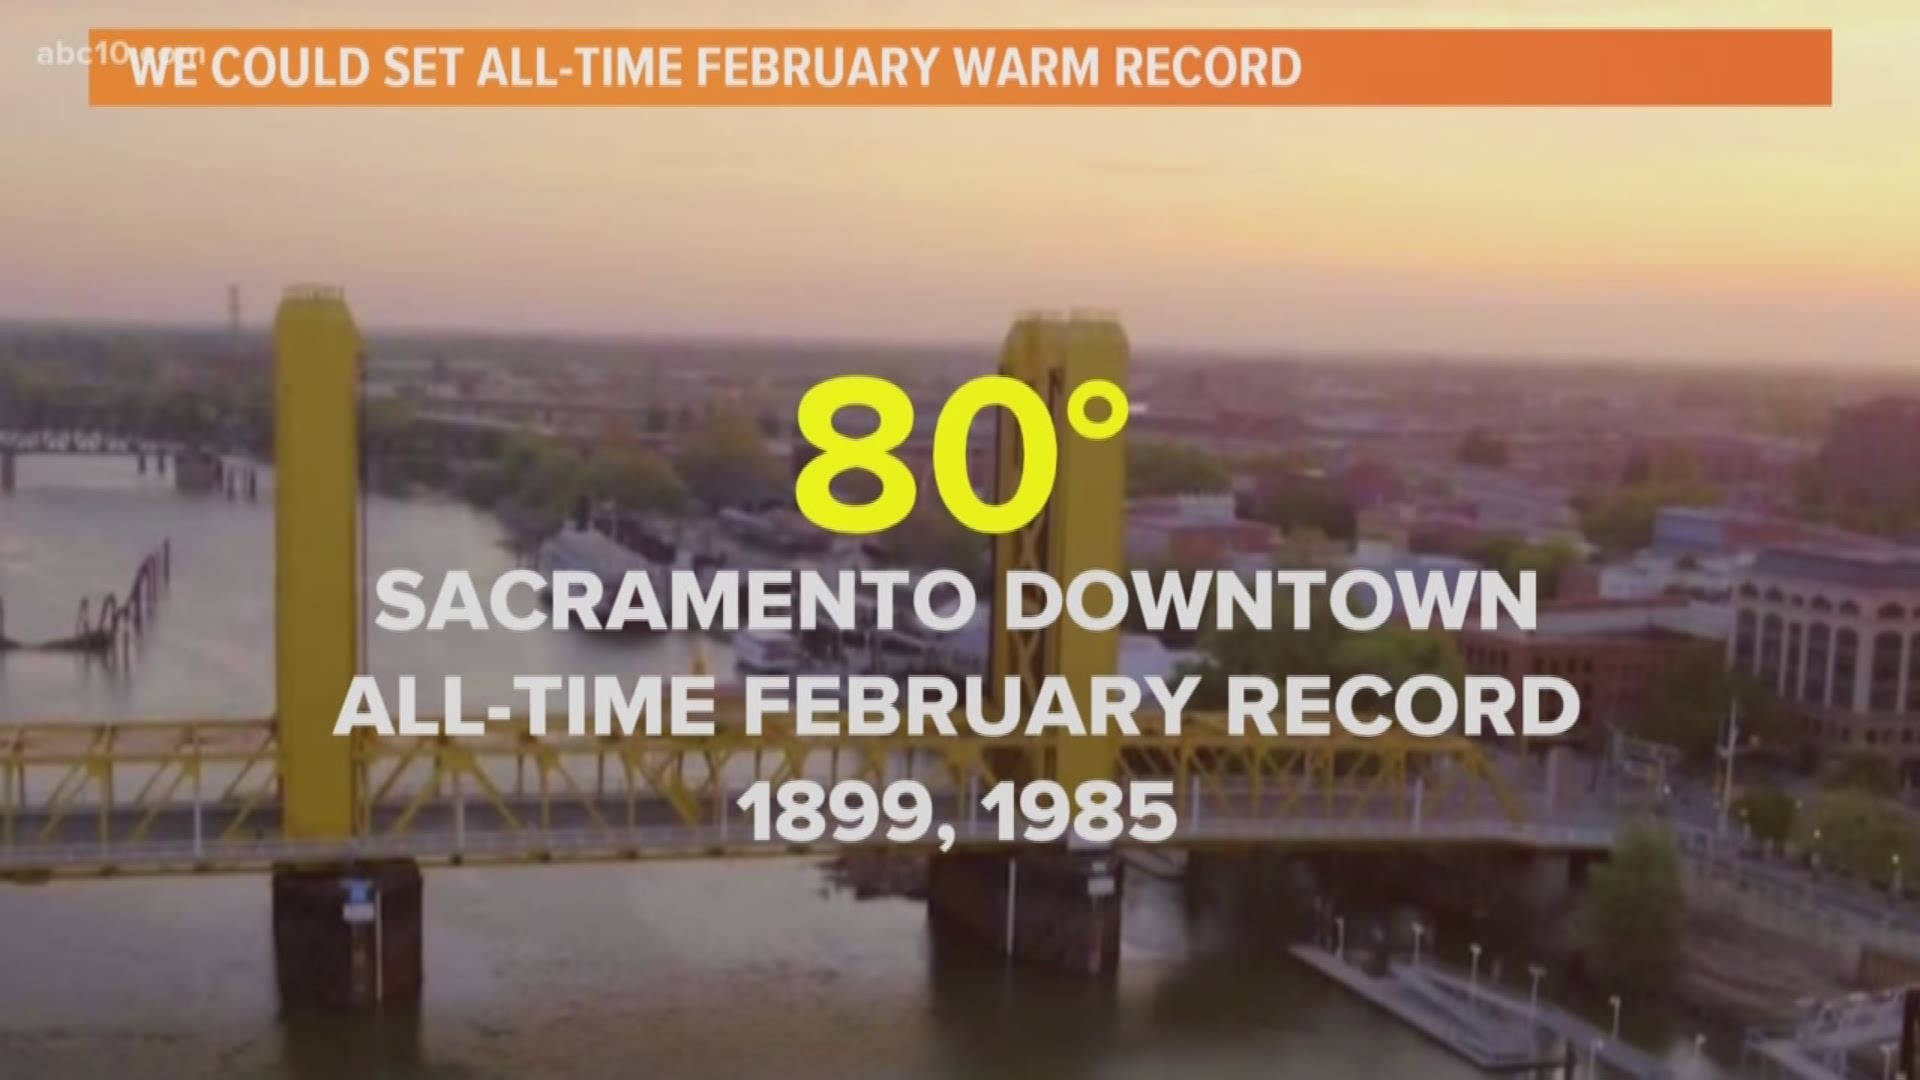 In today's Geek Lab, Rob talks about two not-so-good records Sacramento could set by the week's end: No rain in February & perhaps the hottest temperature recorded.